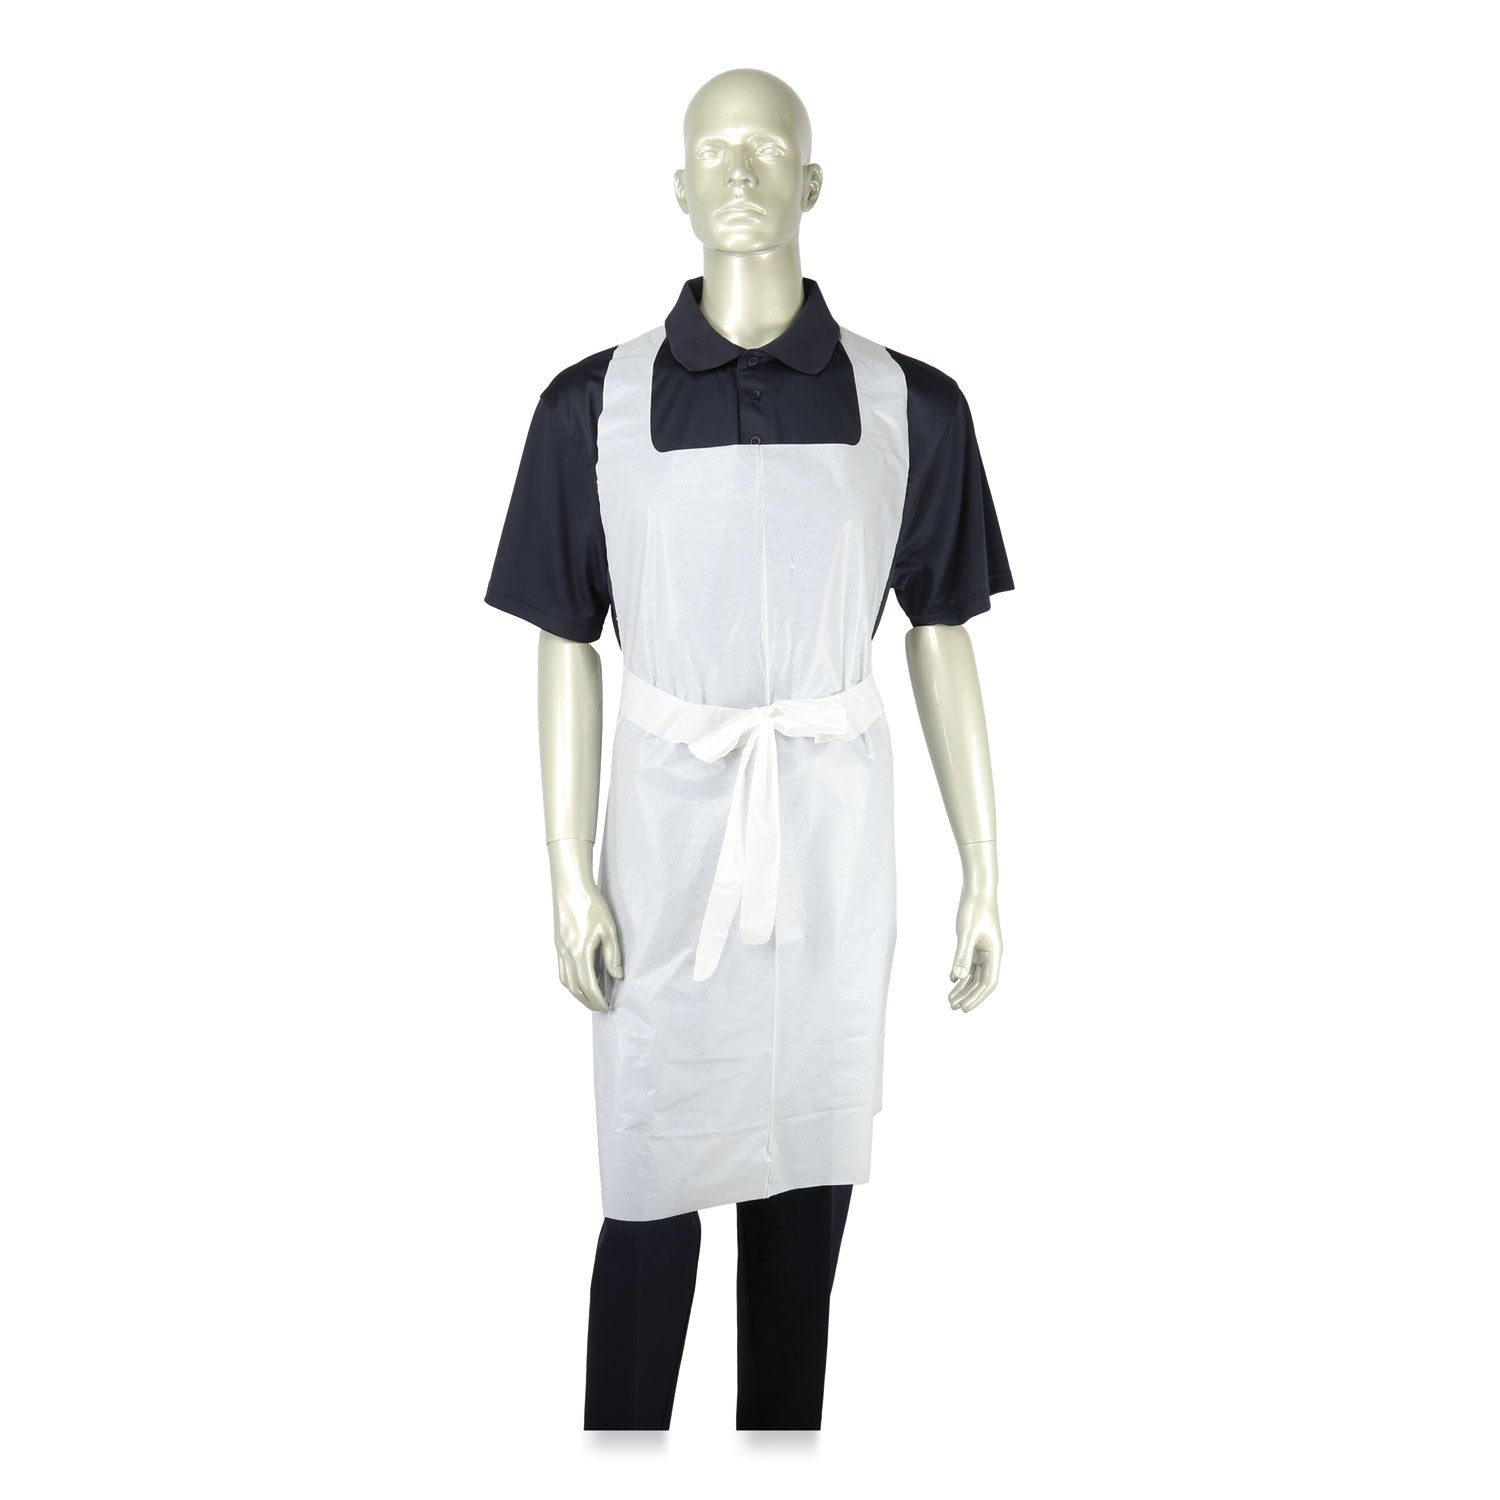 heavyweight-poly-aprons-28-x-46-177-mil-one-size-fits-all-white-500-carton_rpprpa20hw - 2